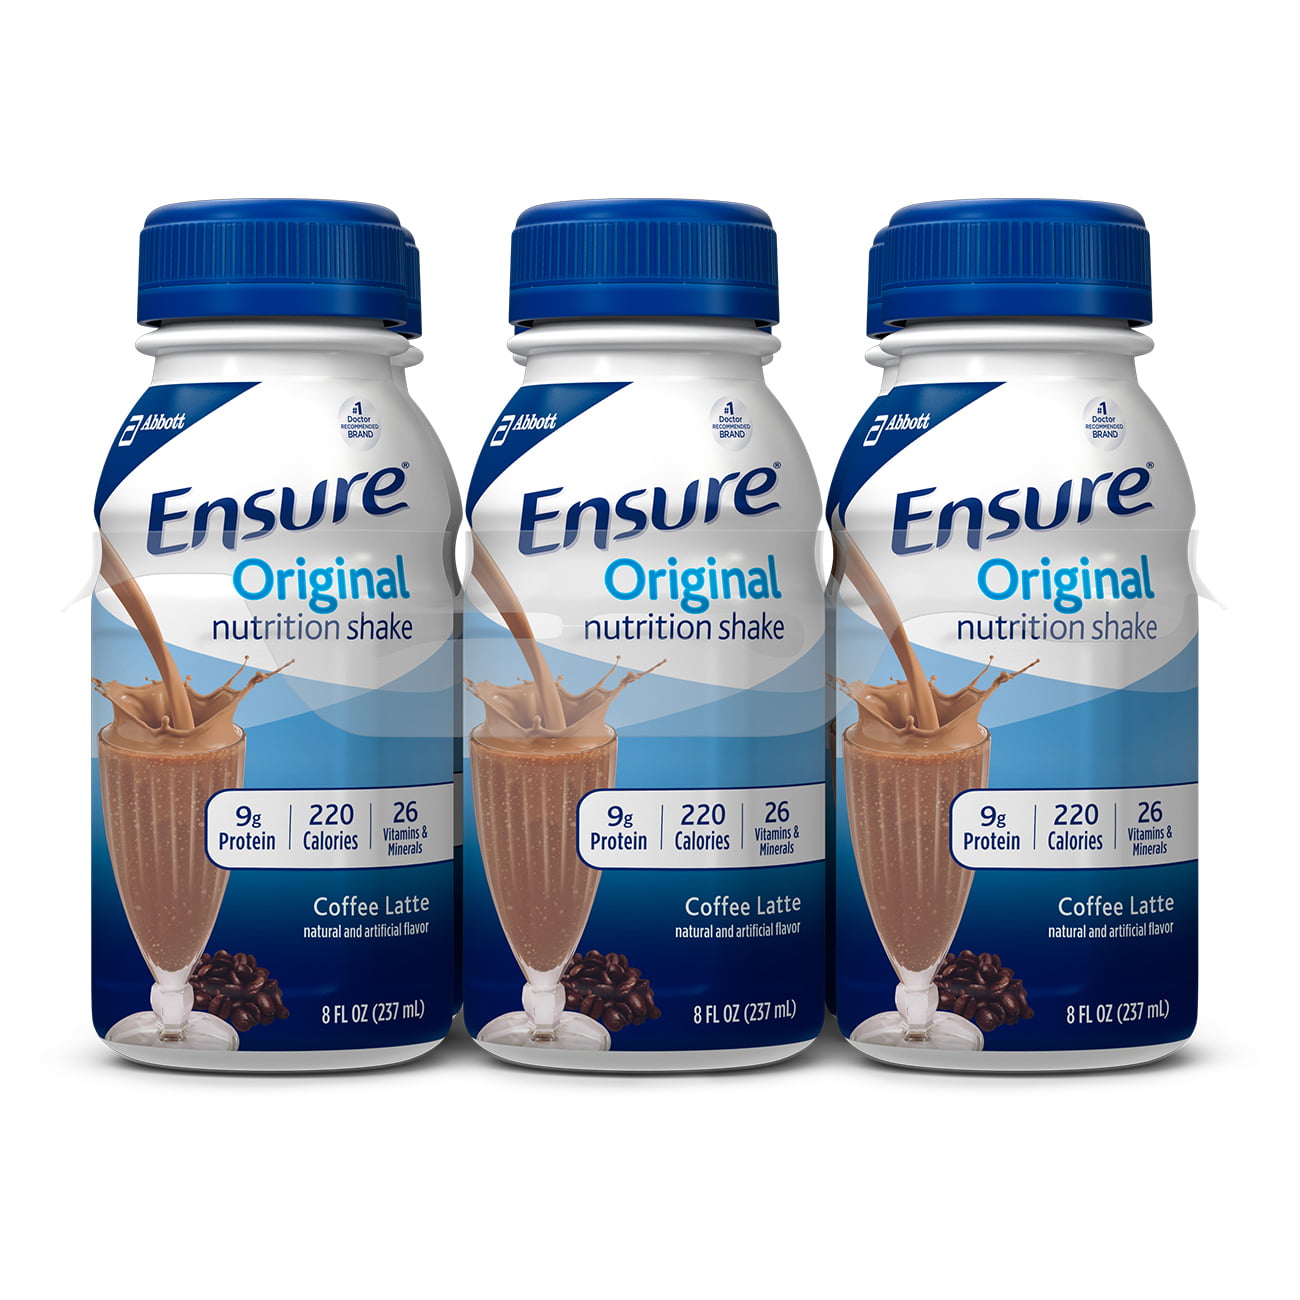 Ensure Original Nutrition Shake with 9 grams of protein ...